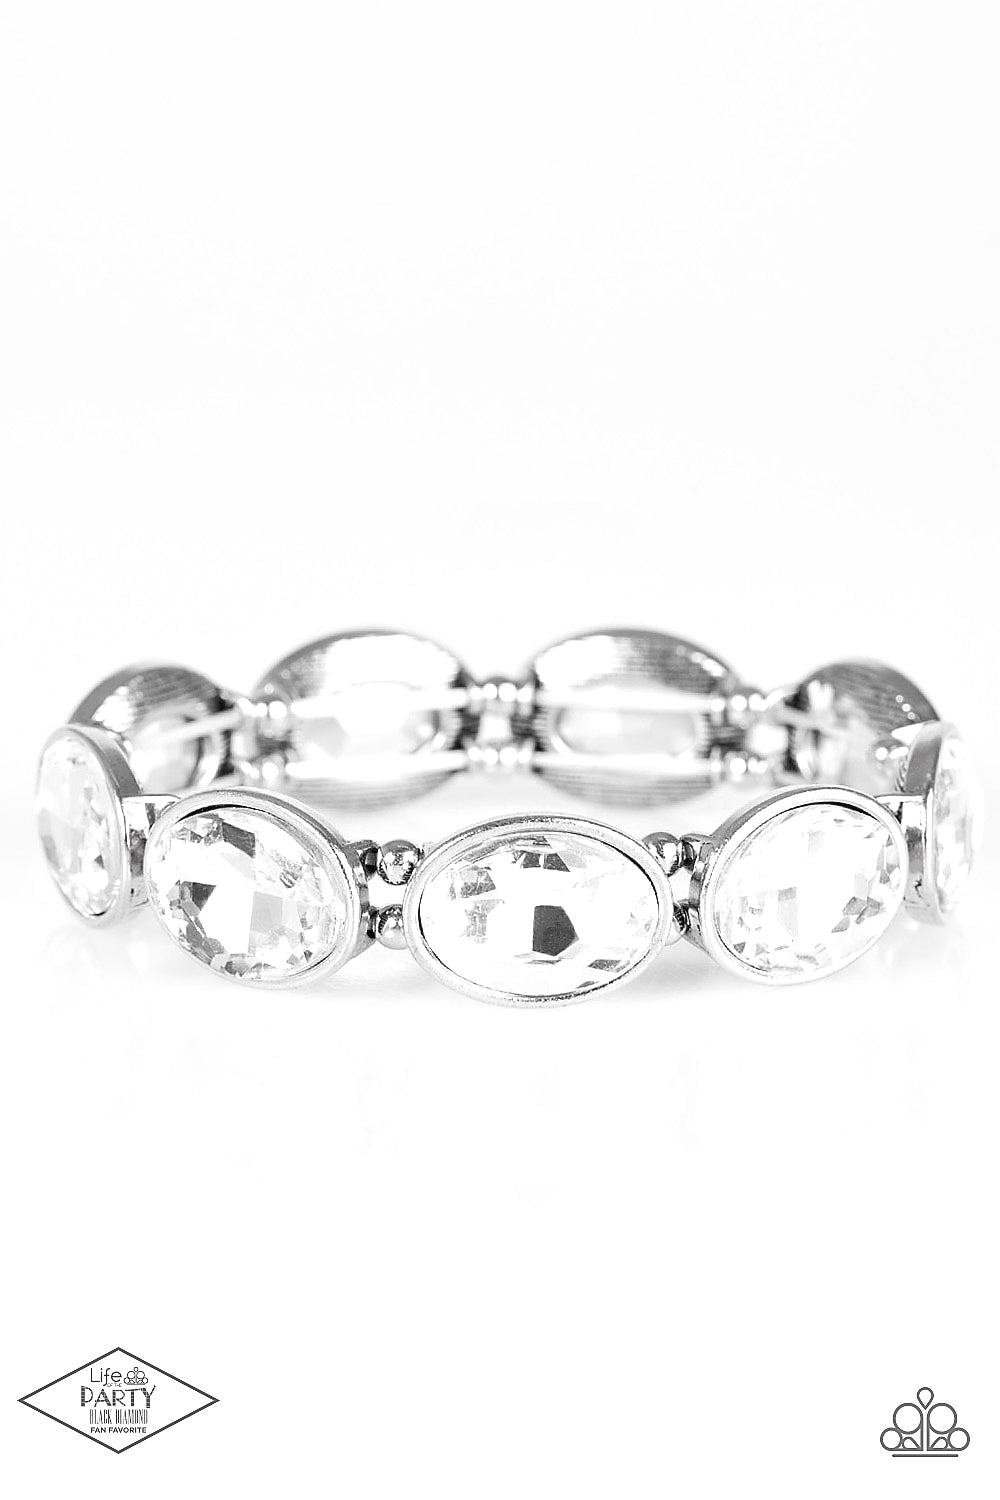 DIVA In Disguise White Bracelet - Paparazzi Accessories  Glassy white gems are pressed into sleek silver frames. Infused with dainty silver beads, the glittery frames are threaded along stretchy elastic bands for a glamorous look around the wrist.  Sold as one individual bracelet. This Fan Favorite is back in the spotlight at the request of our 2021 Life of the Party member with Black Diamond Access, Kathy D.